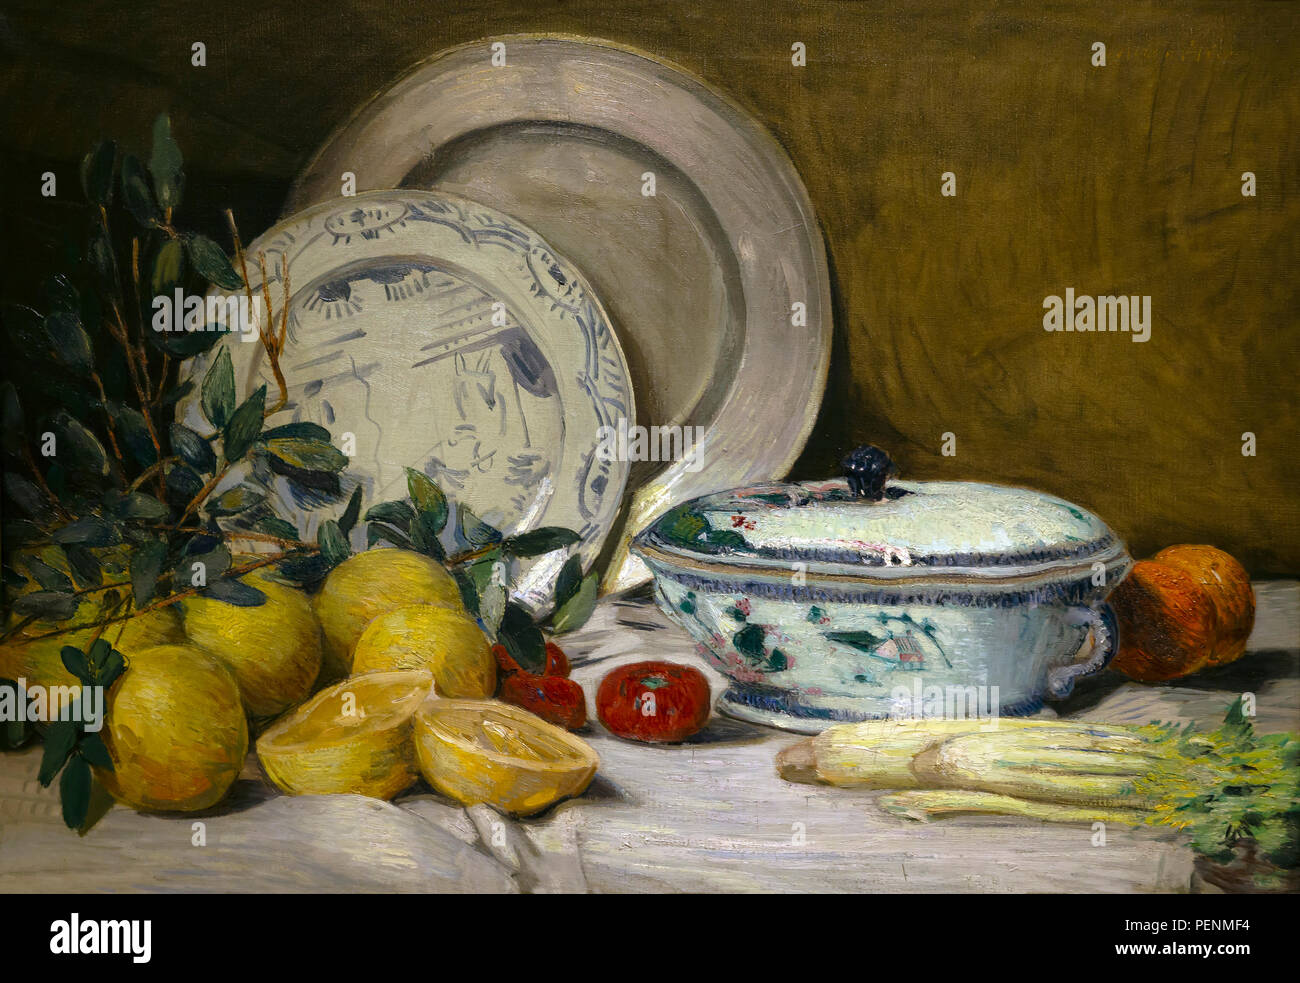 Still Life, Julian Alden Weir, 1902-1905, Indianapolis Museum of Art, Indianapolis, Indiana, USA, North America Stock Photo